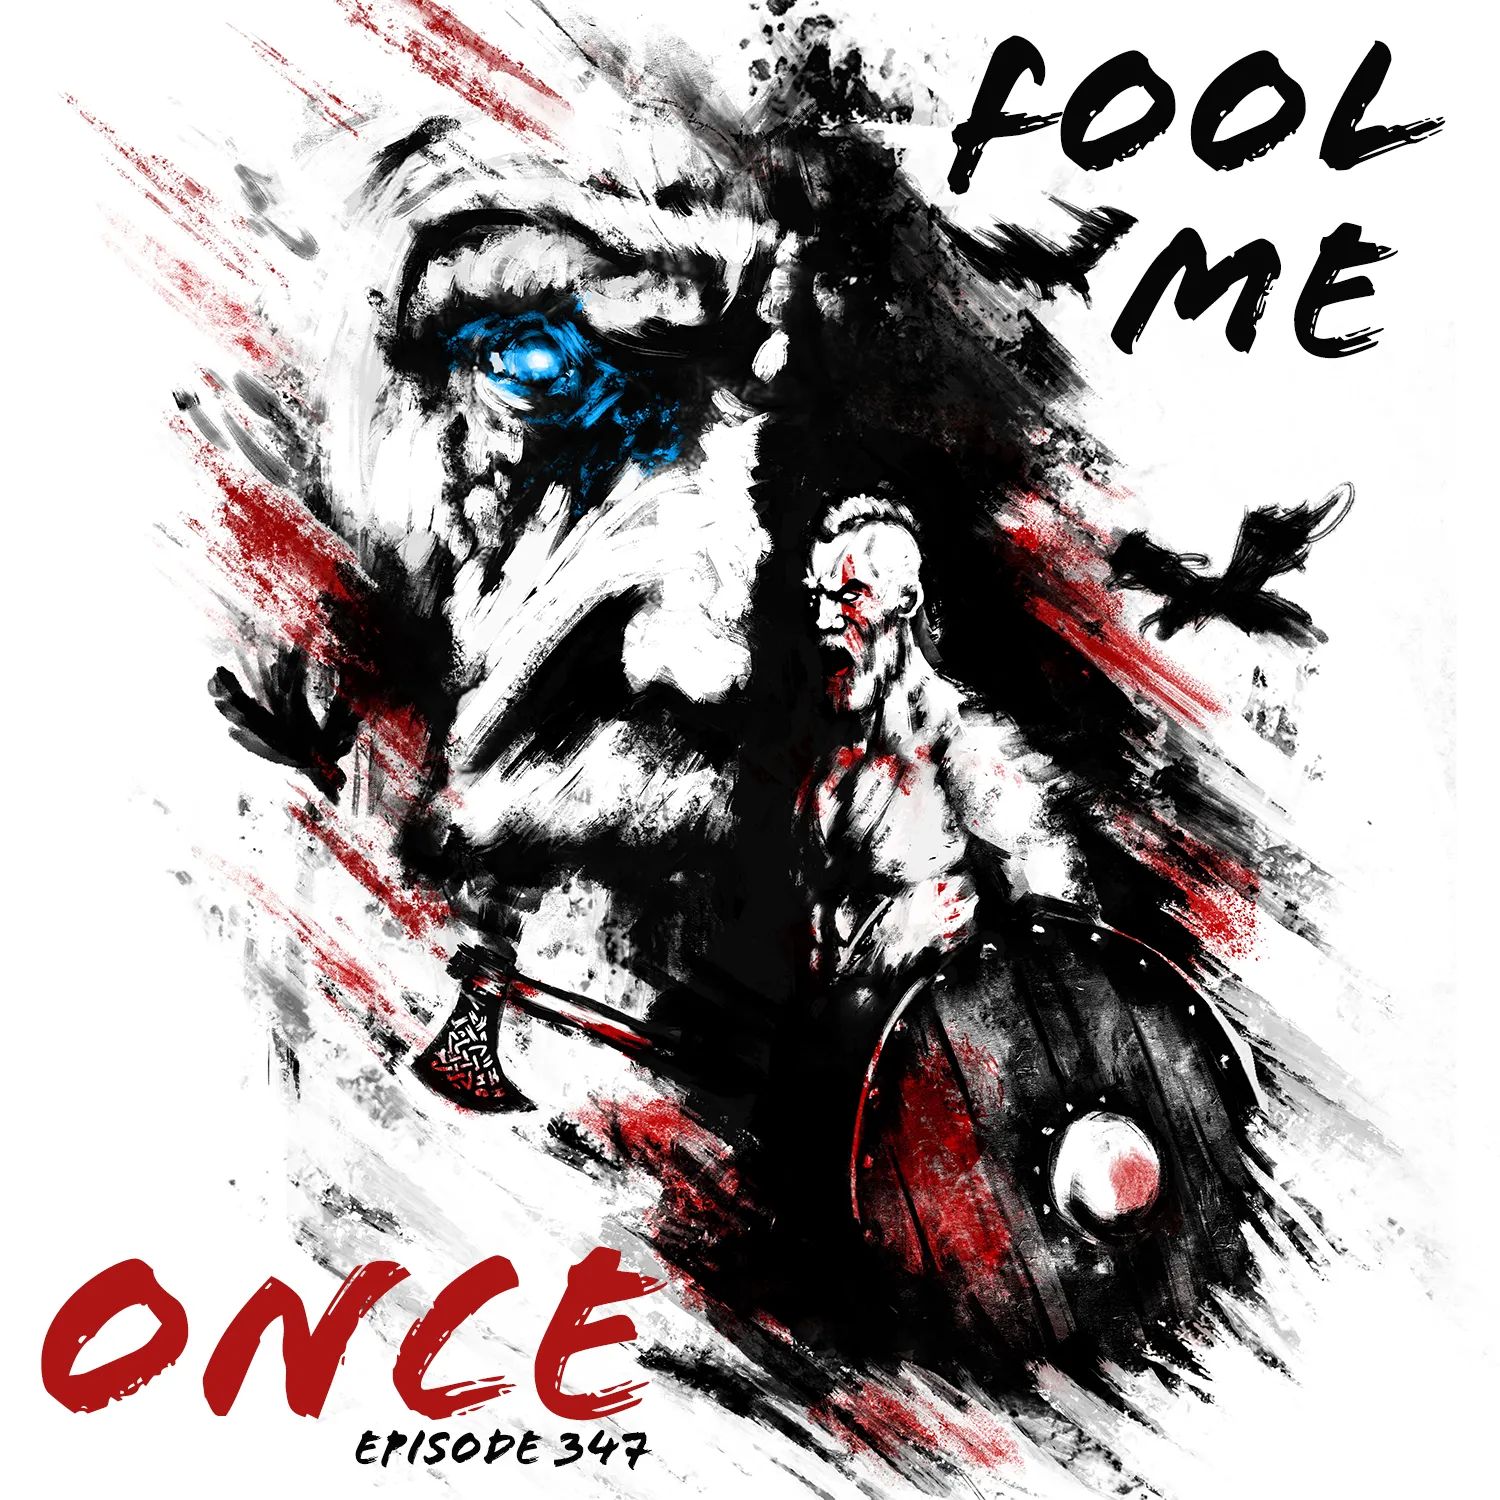 A striking abstract artwork featuring a large, ominous face with a bright blue eye on the left, juxtaposed with a smaller figure in warrior attire holding a shield and ax on the right. The image is dynamic, with bold strokes of black, white, and red paint creating a sense of movement. The words 'FOOL ME ONCE' are painted in red on the top right and bottom left.